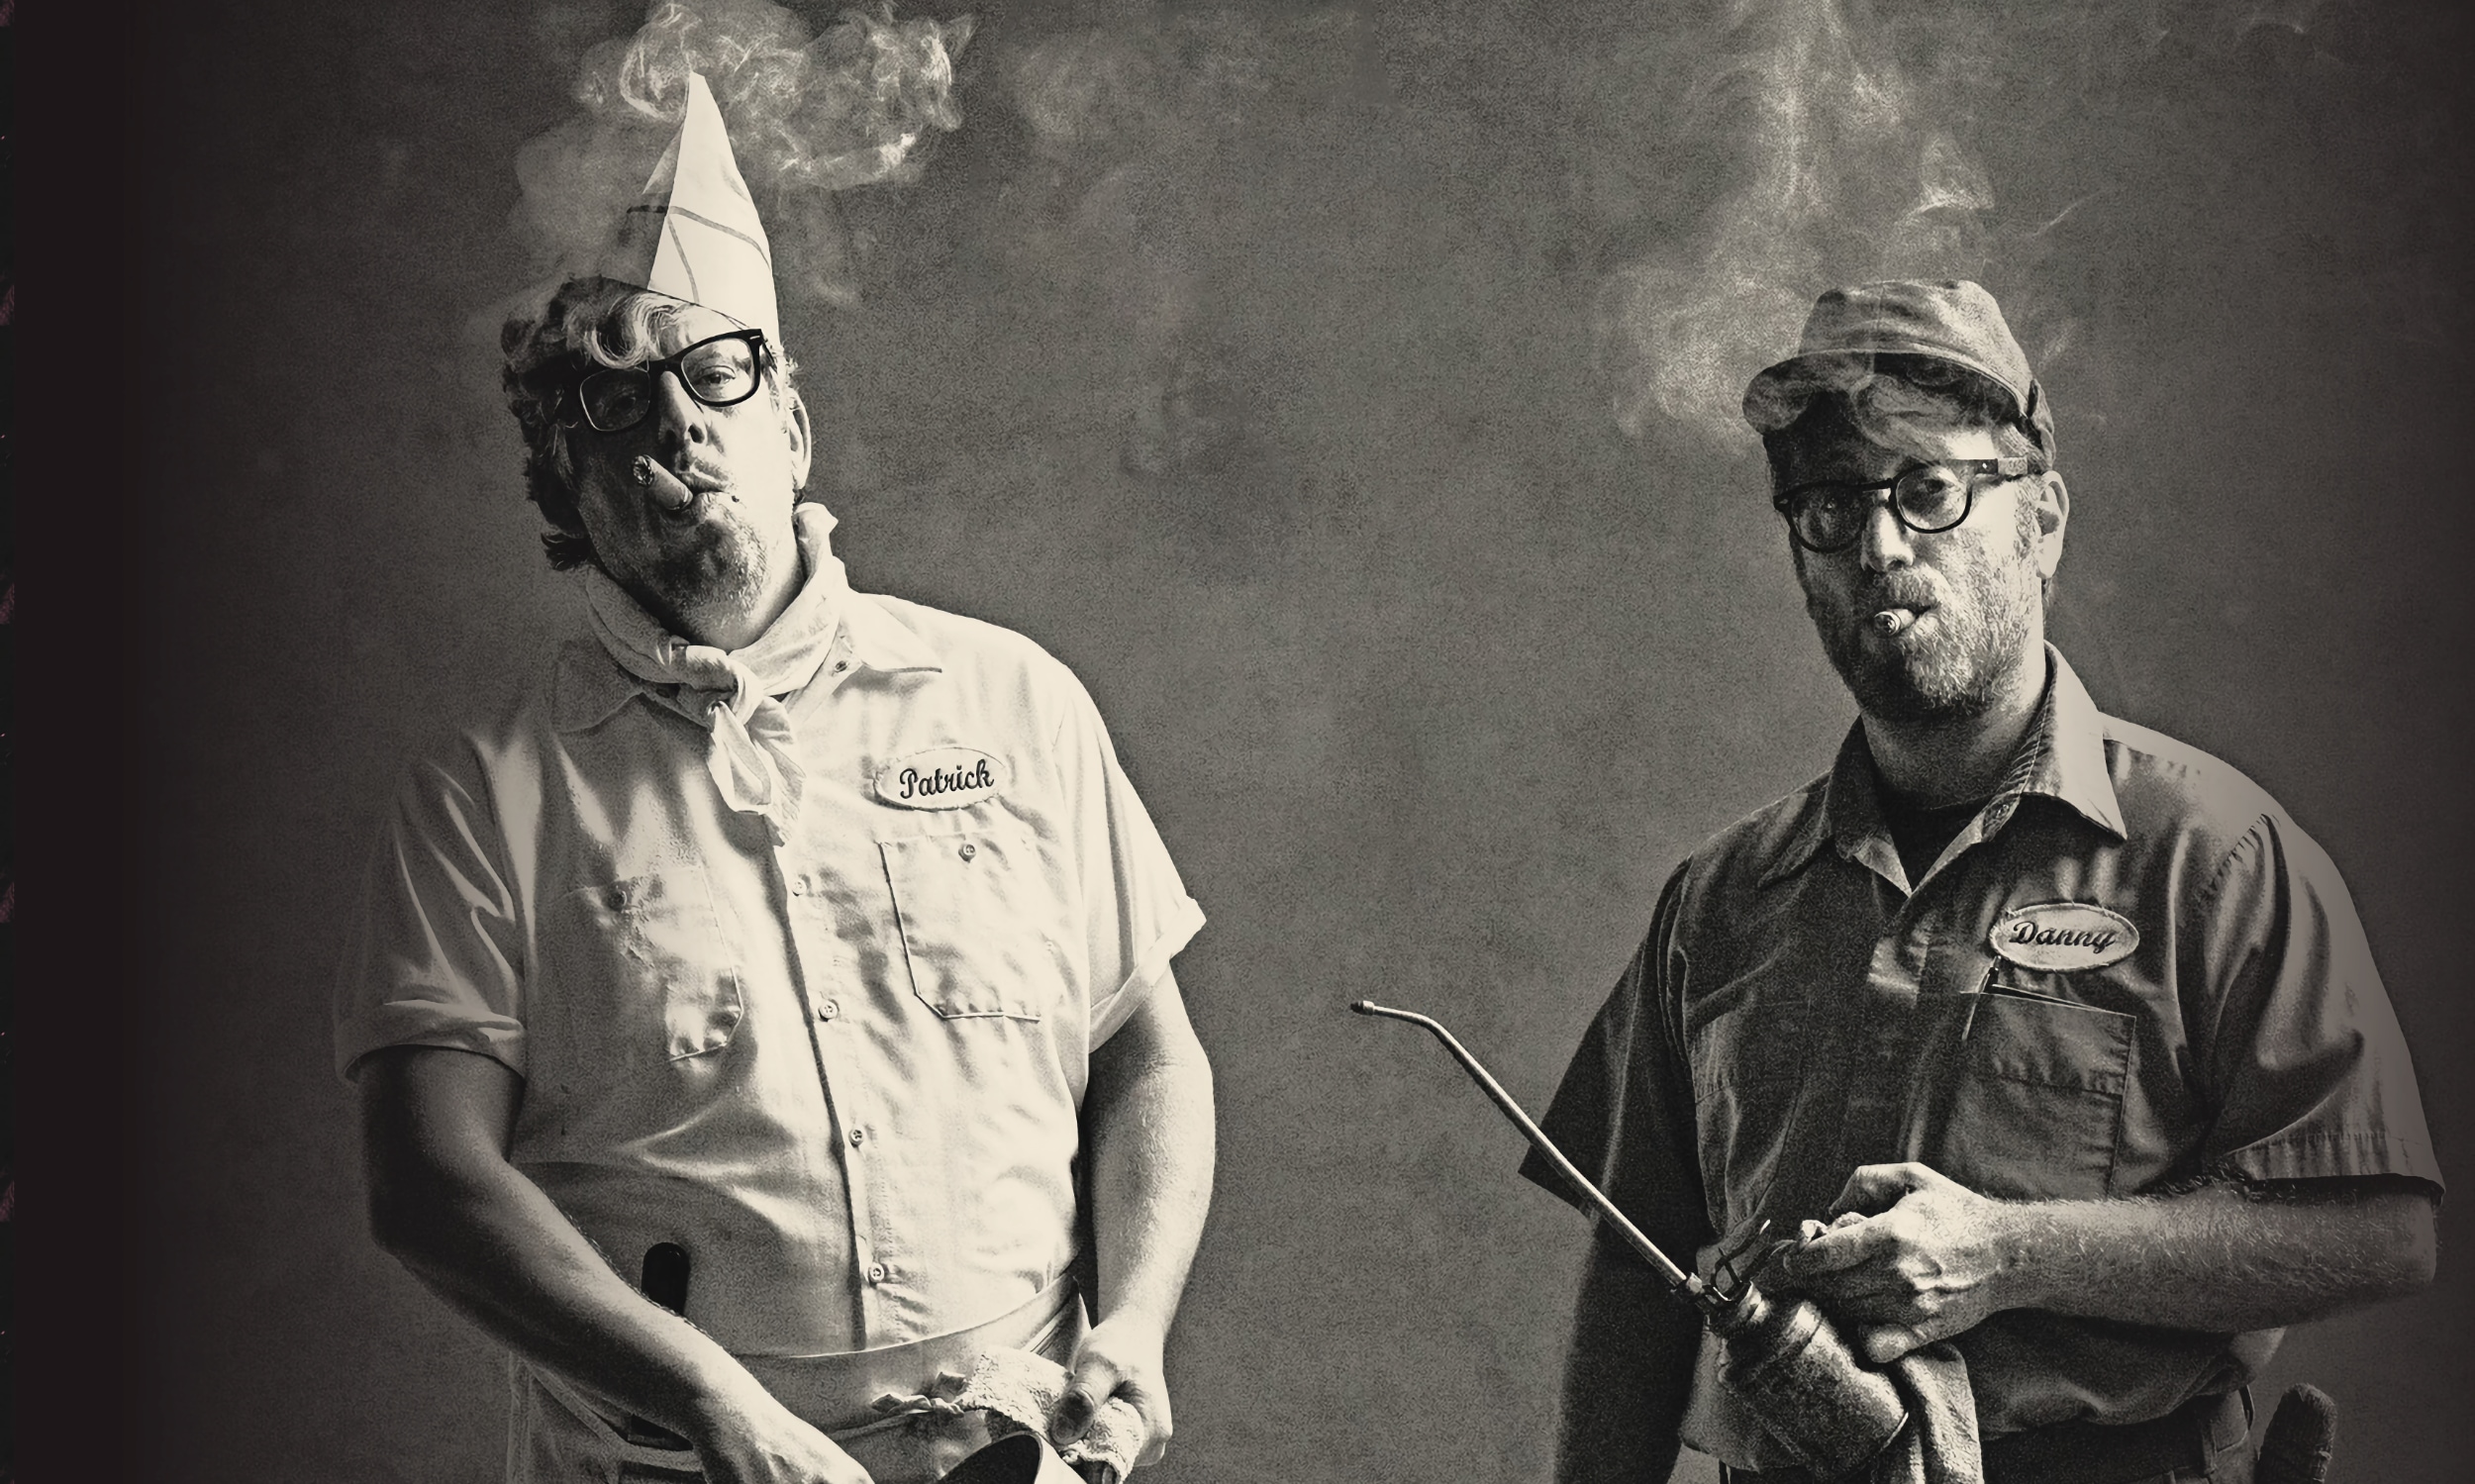 Patrick and Danny of the Black Keys, in the costumes of a school cook and school janitor for their "Wild Child" video